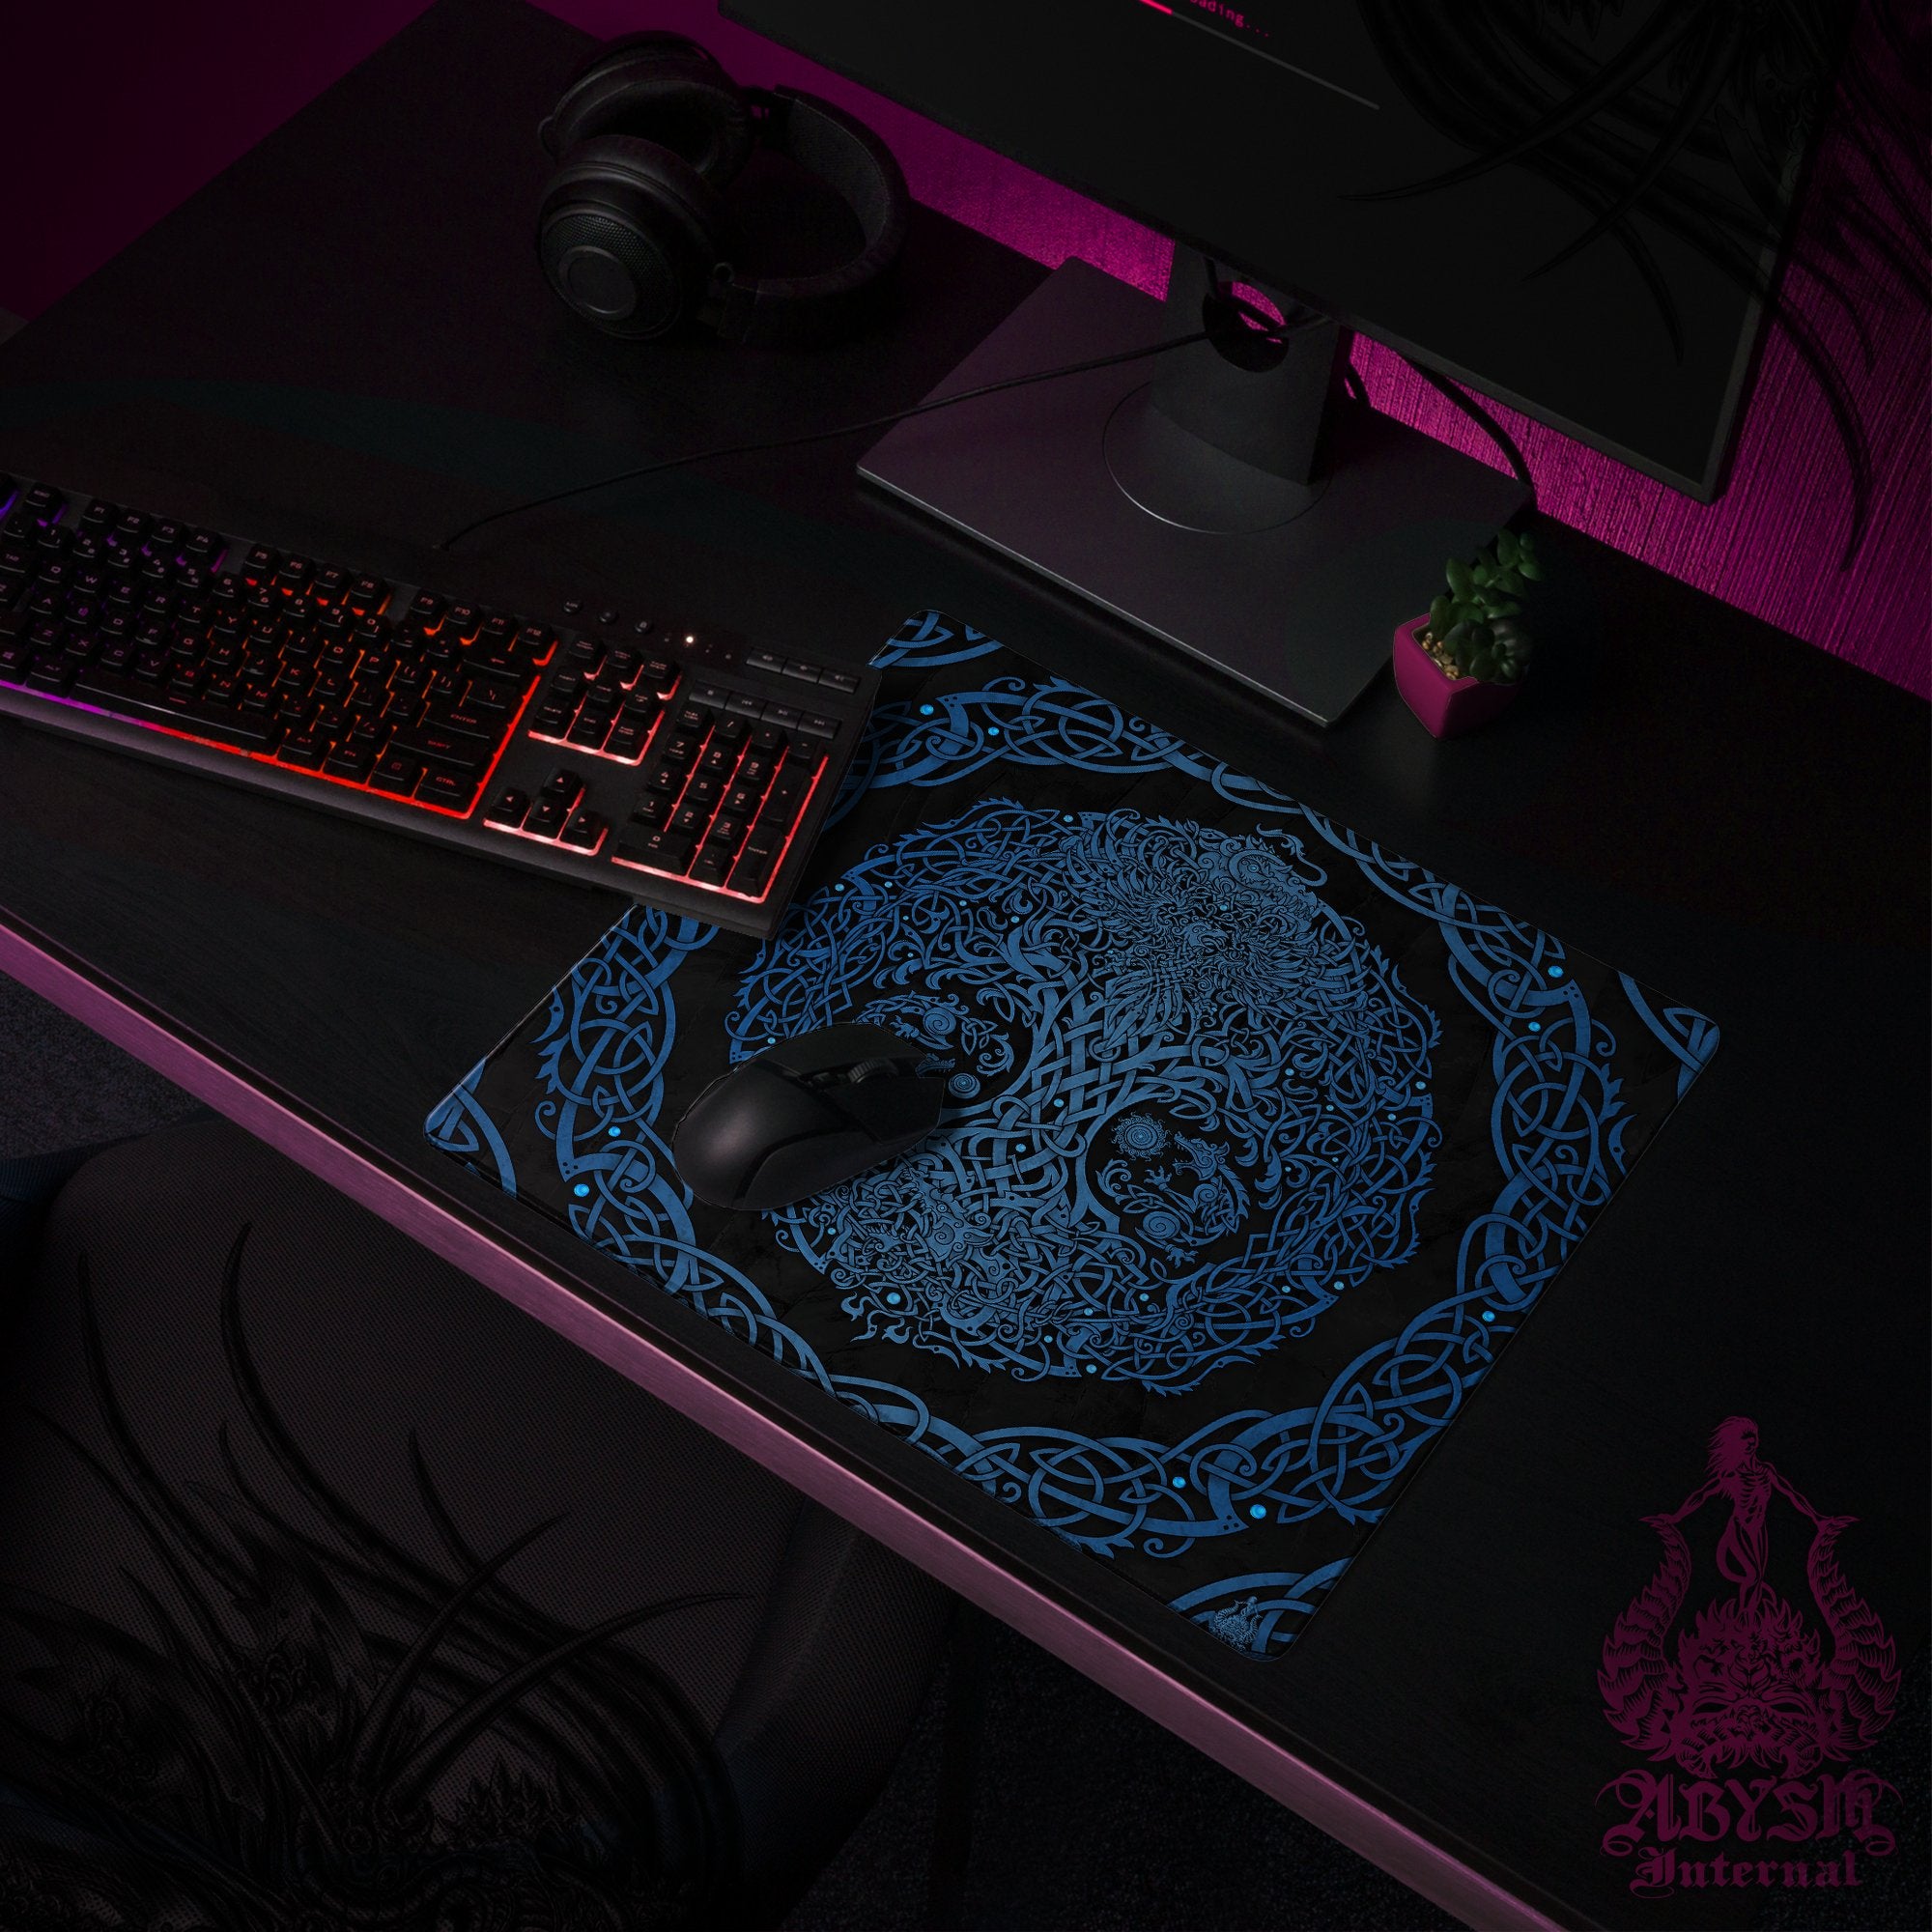 Yggdrasil Gaming Mouse Pad, Viking Desk Mat, Norse Tree of Life Table Protector Cover, Knotwork Workpad, Nordic Art Print - Blue, Black, Ice, Pastel Goth, 3 Colors - Abysm Internal